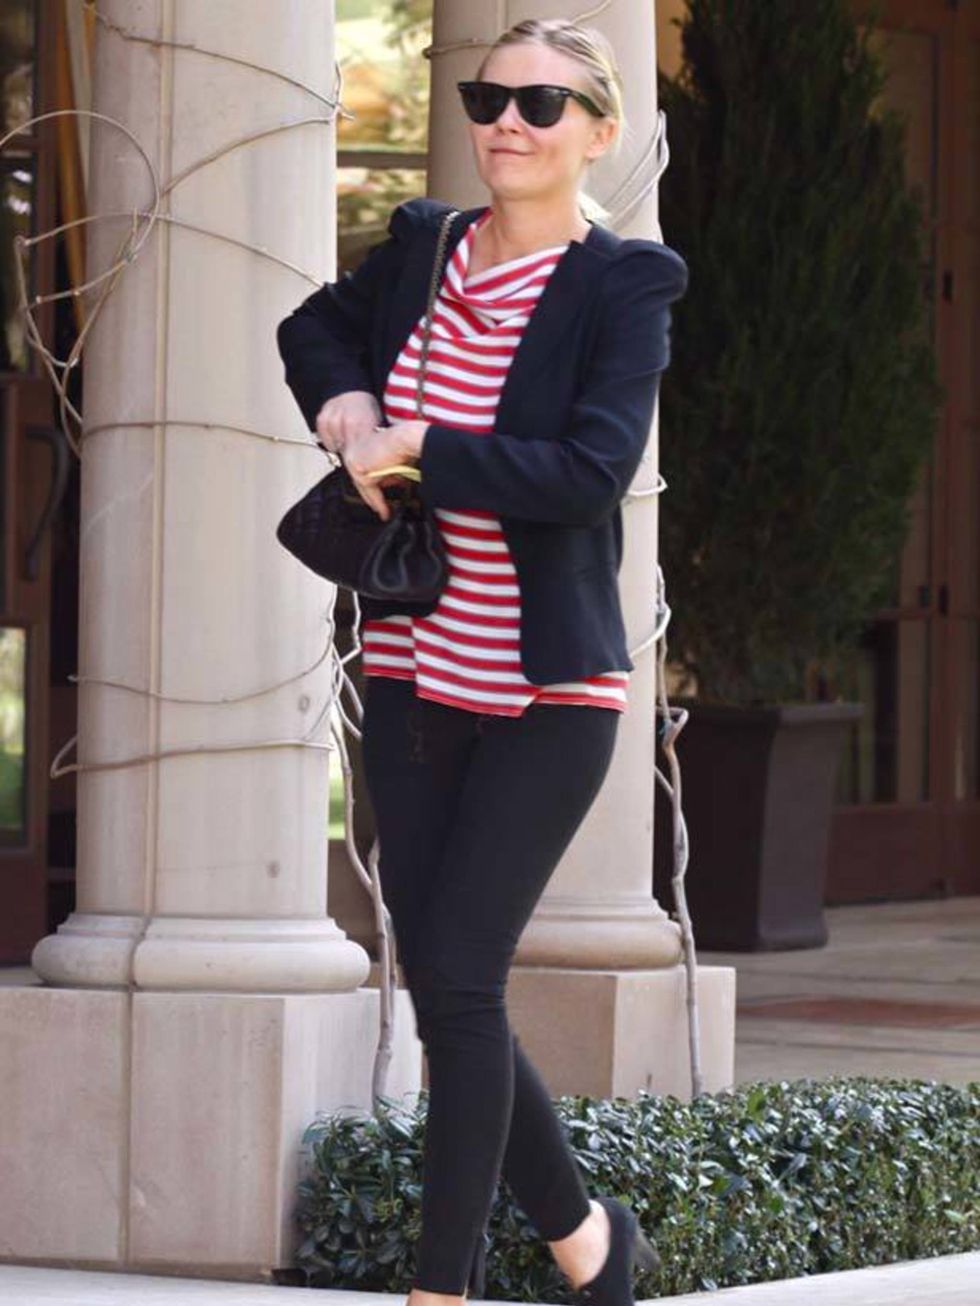 <p><a href="http://www.elleuk.com/starstyle/style-files/(section)/kirsten-dunst">Kirsten Dunst</a> teaming a Breton stripe top with a lightweight blazer, March 2011</p>